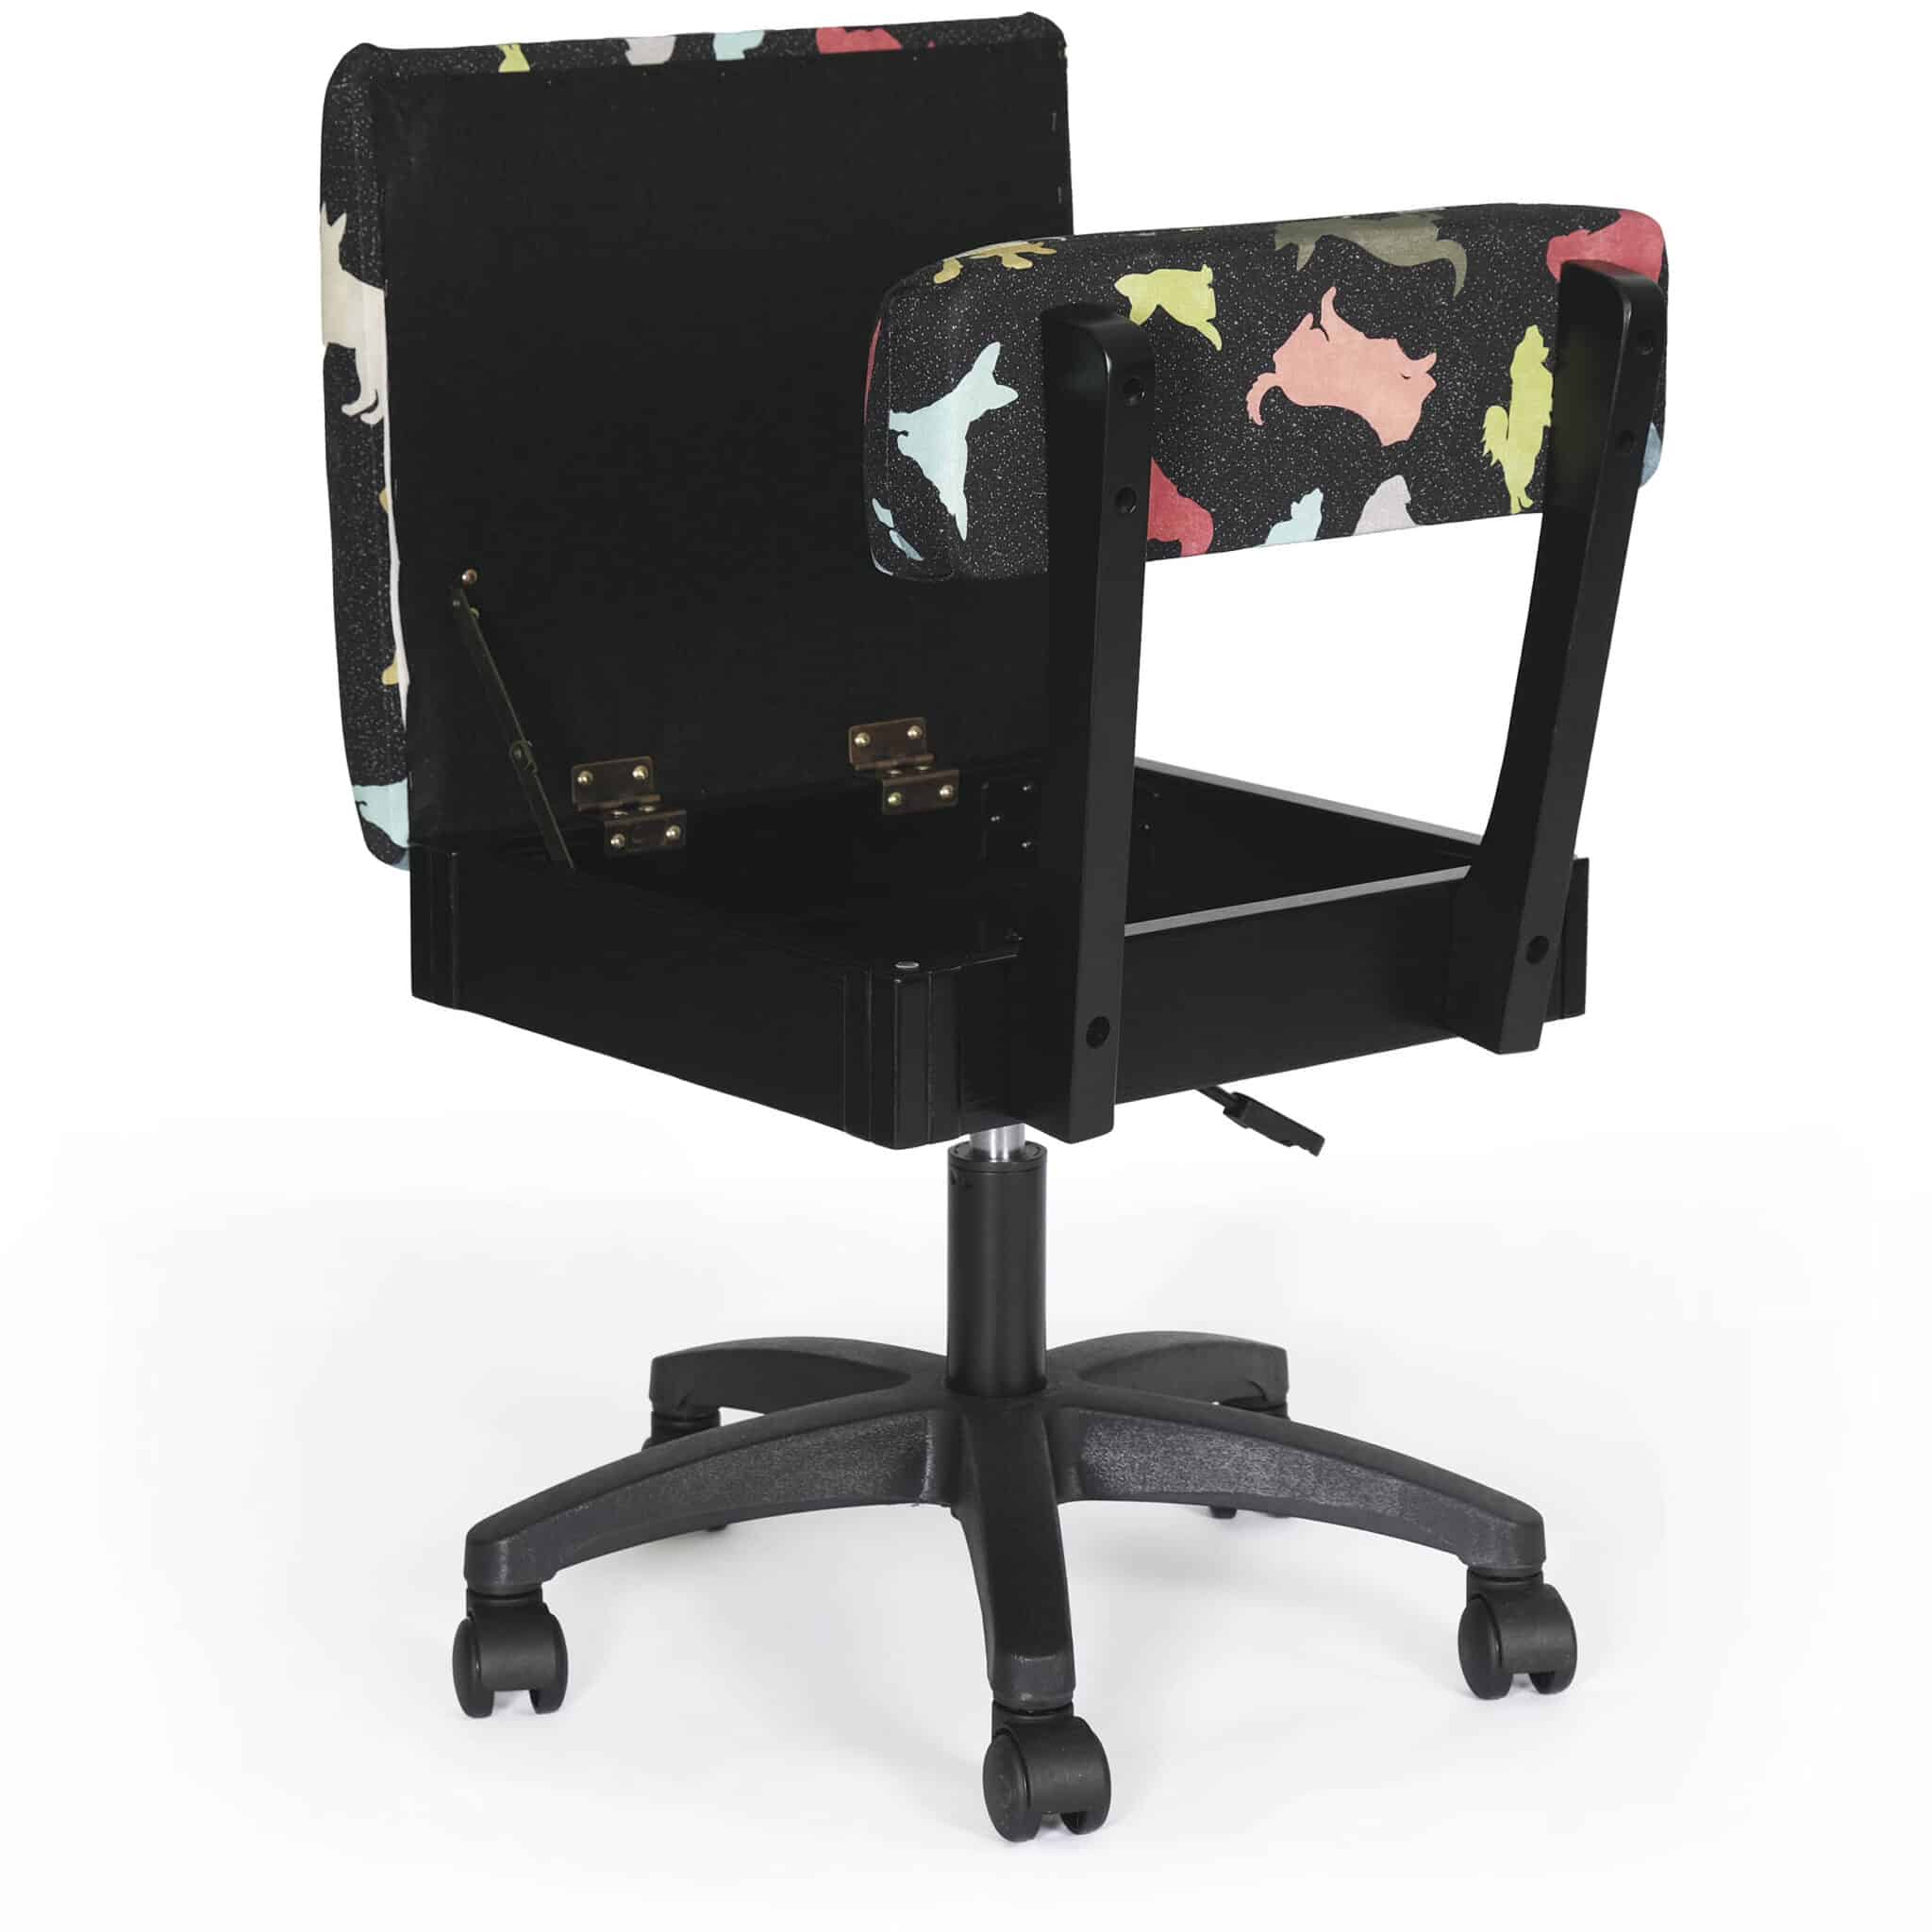 The Good Dog Hydraulic Sewing Chair offers an adjustable seat, plush cushions, lumbar support and five-star 360° swivel base make it easy to sew ergonomically, along with the seat’s secret storage compartment is perfect for stashing notions or an emergency dog biscuit.